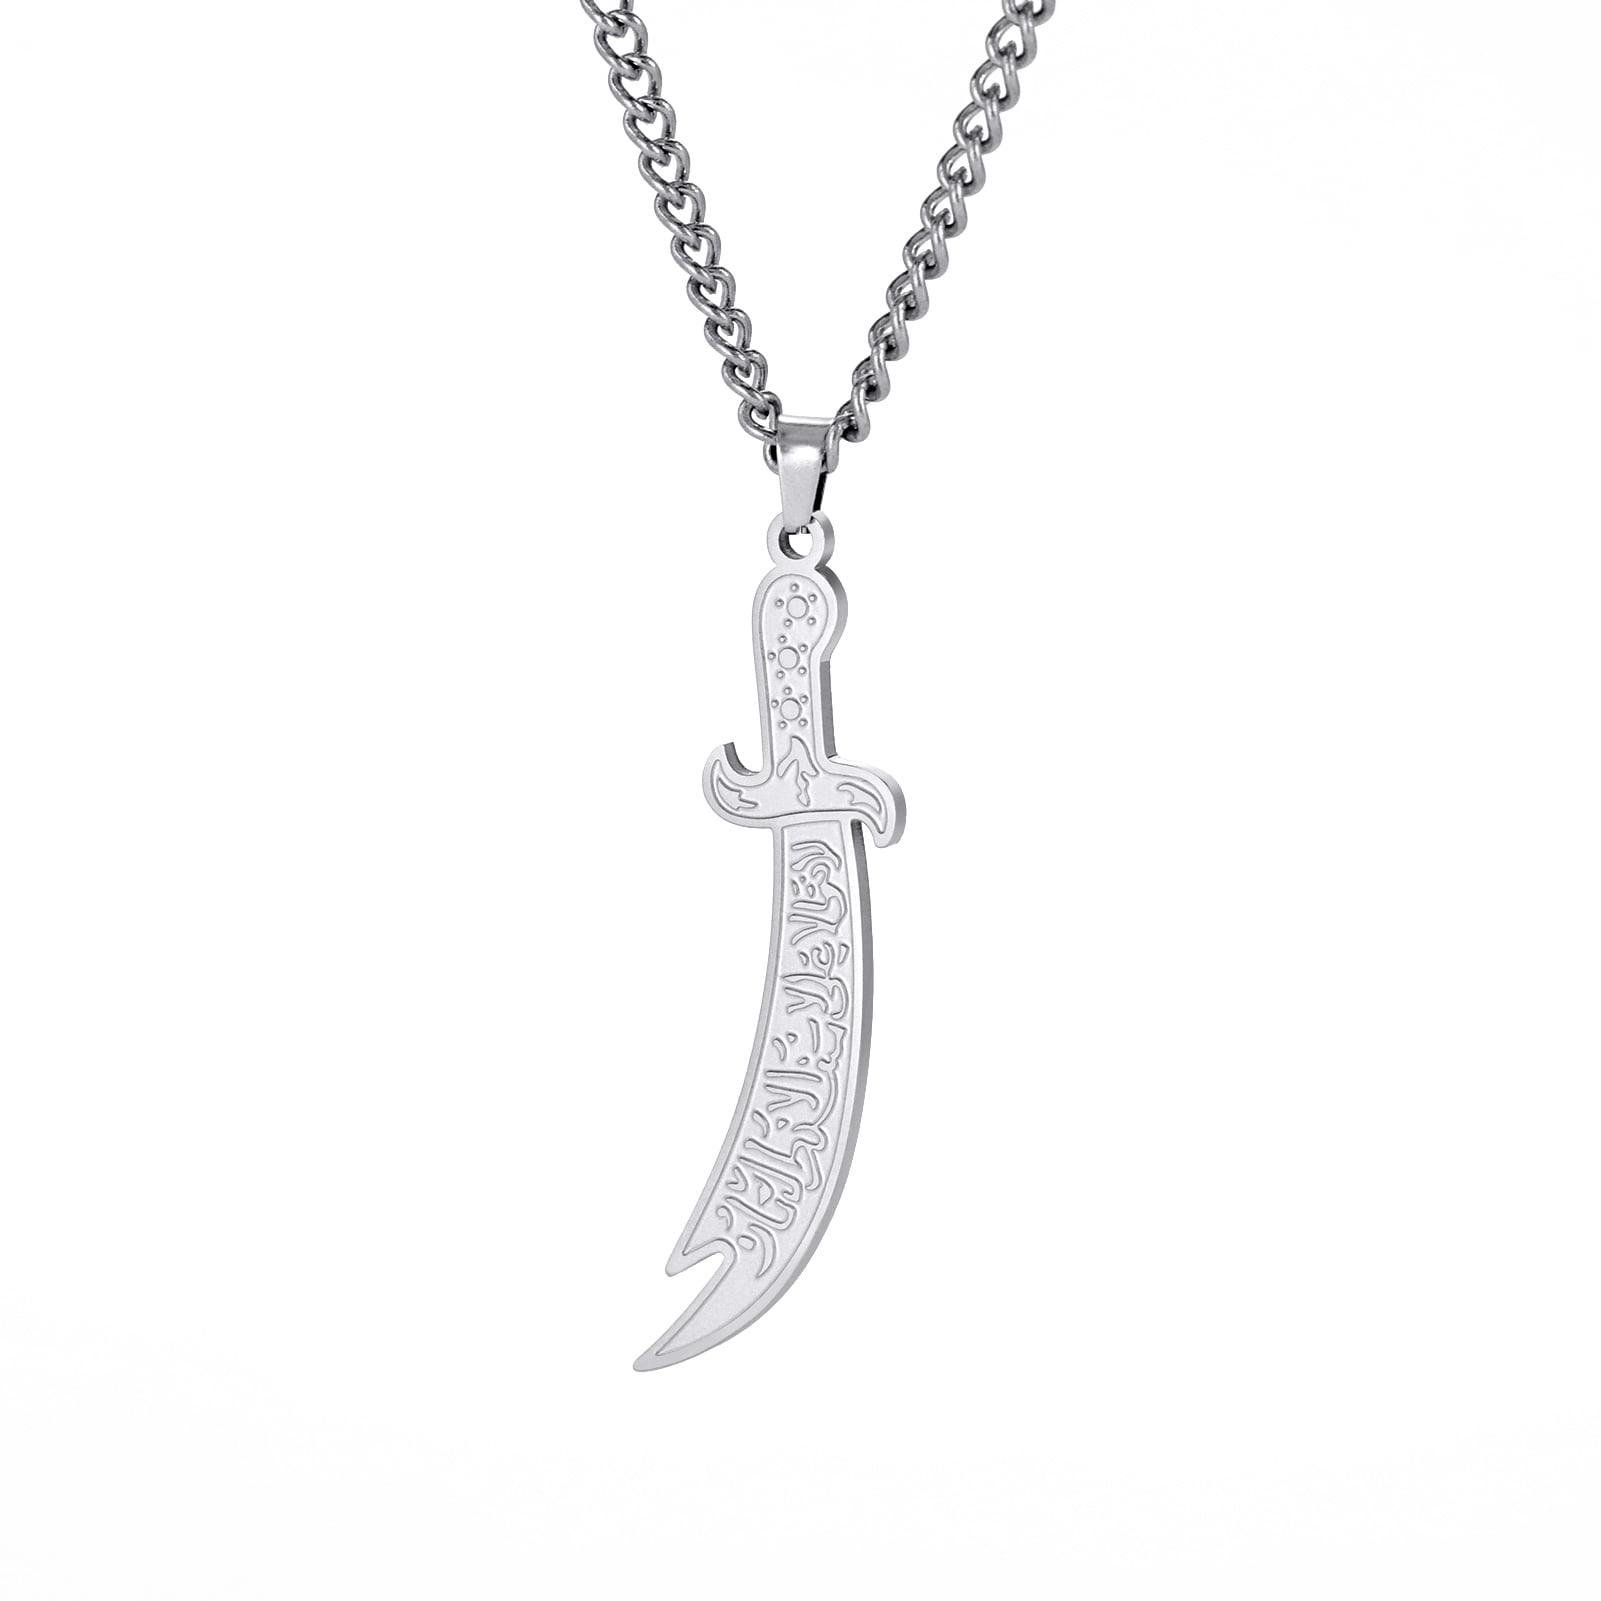 UNDERCOVER UCW4N06 Silver Necklace | Hypebeast